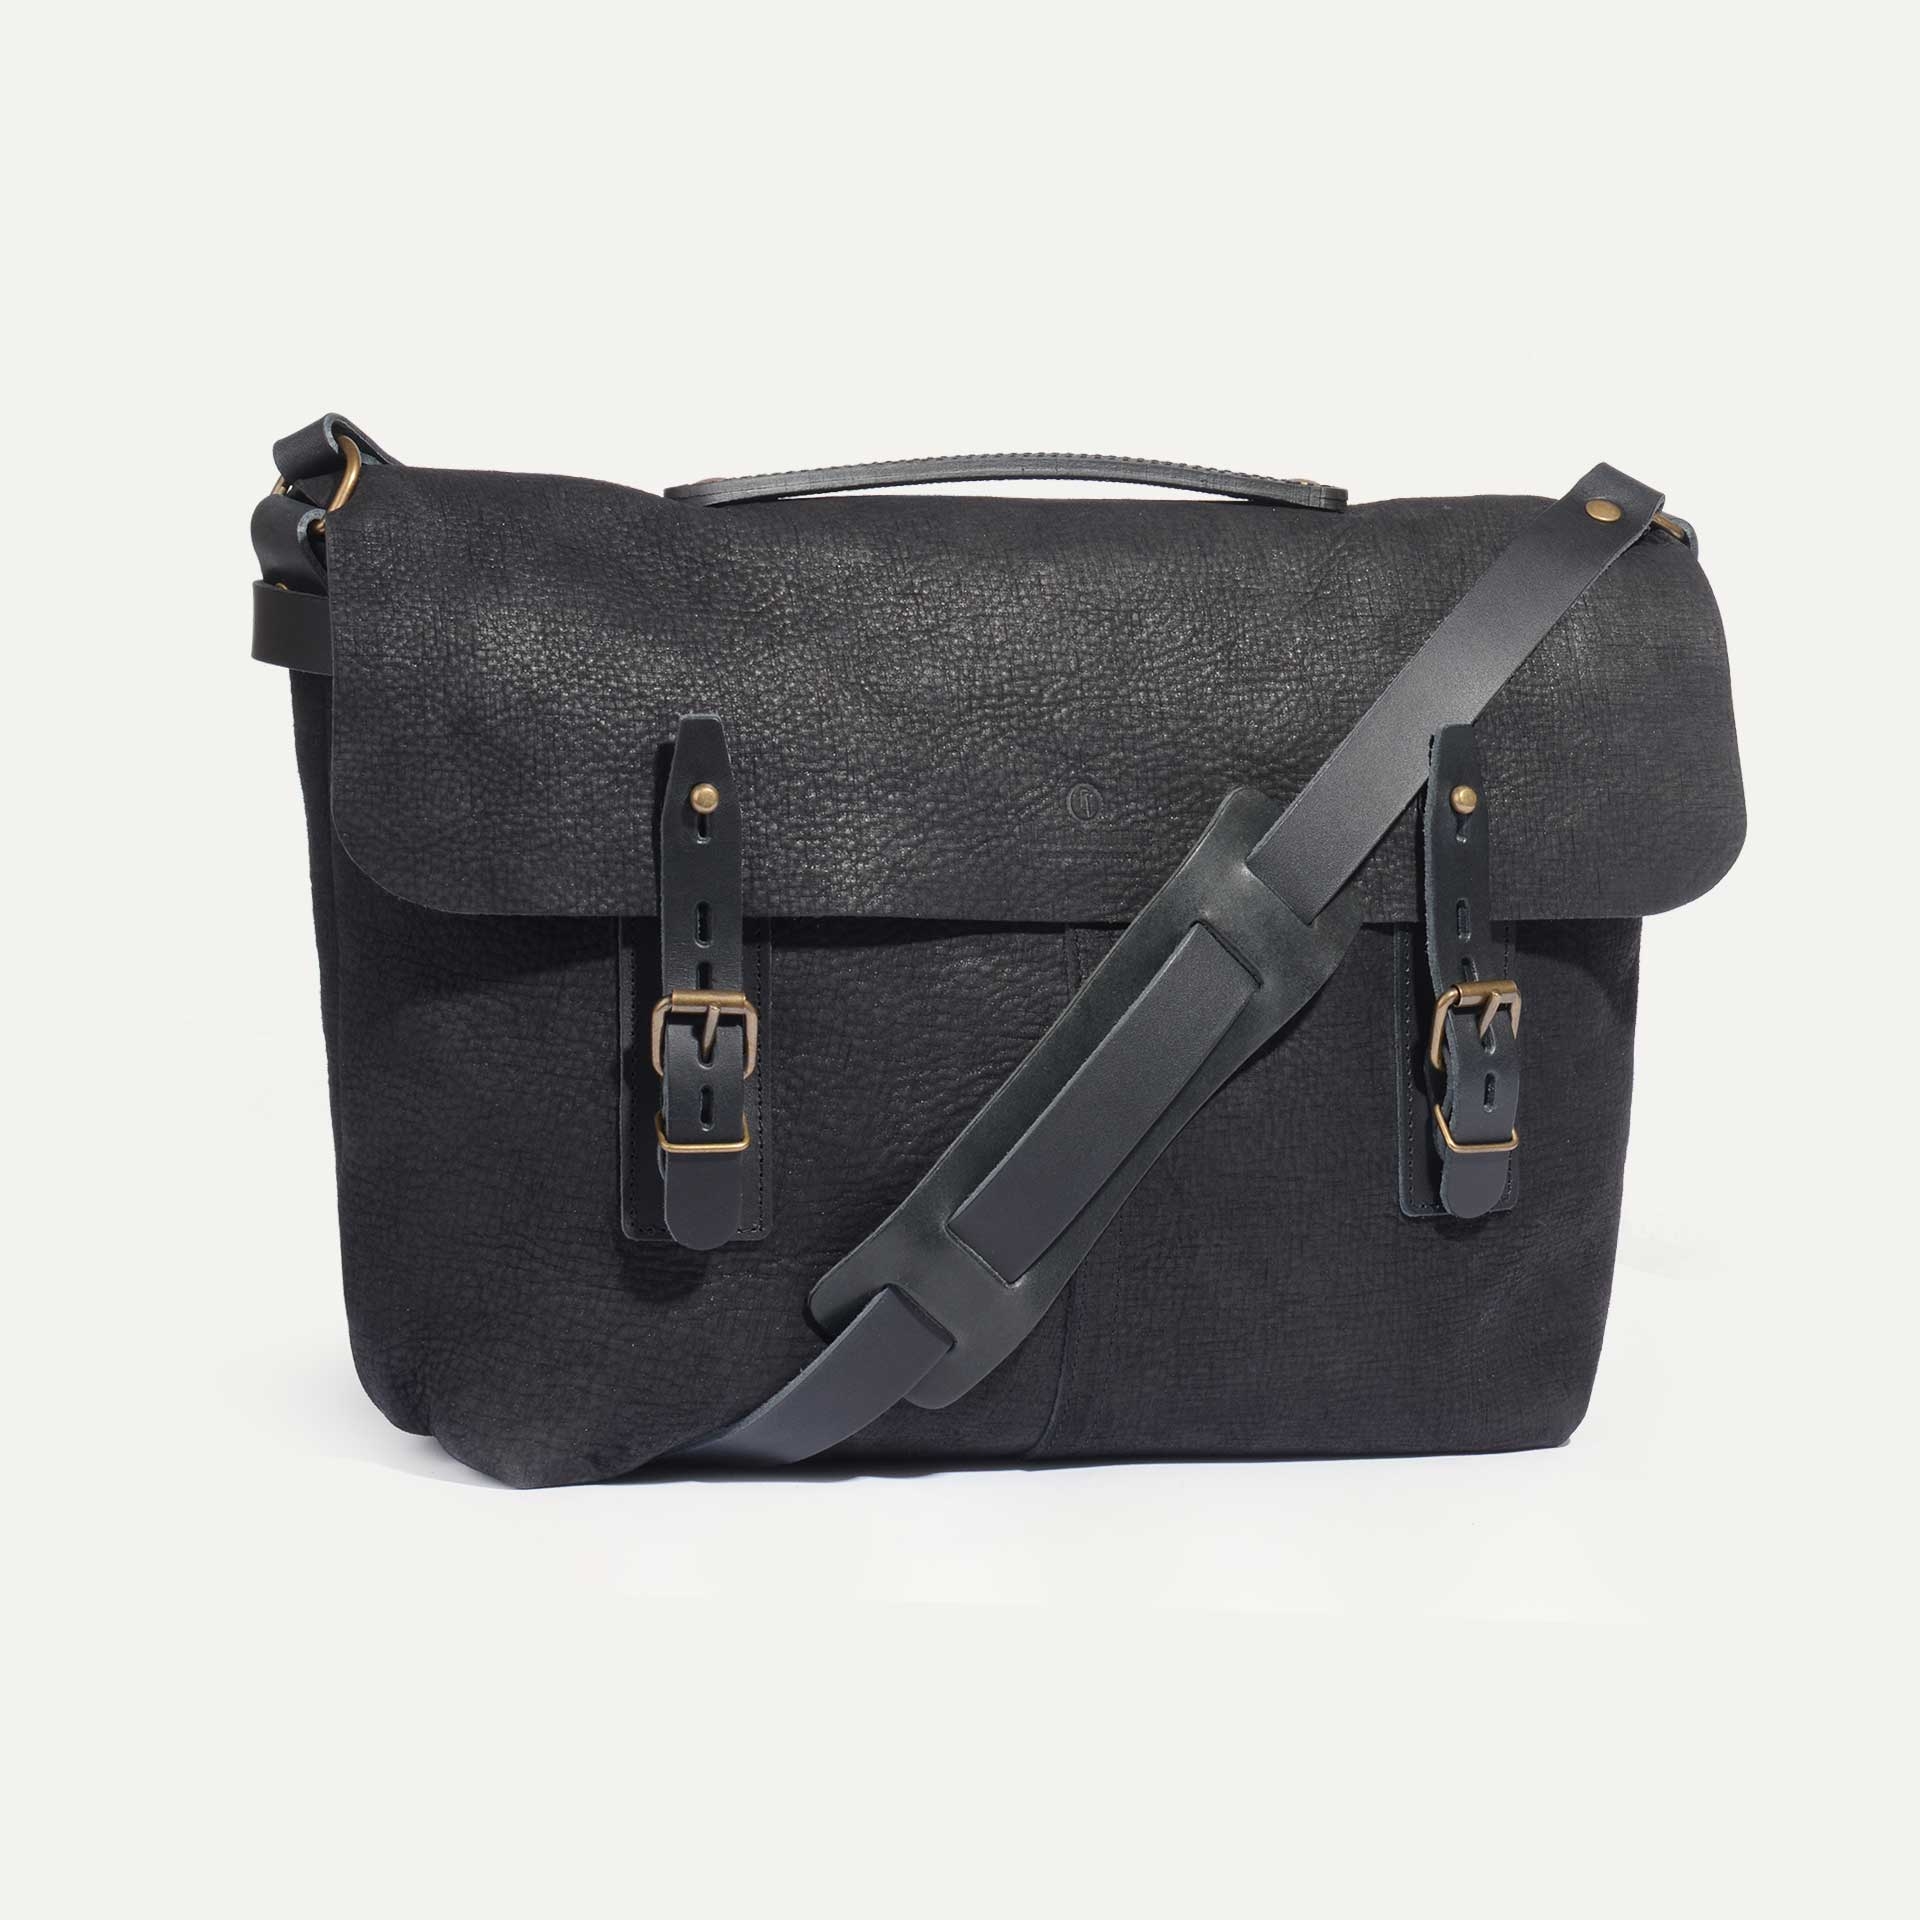 Lucien Satchel bag - Charcoal Black / Waxed Leather (image n°2)